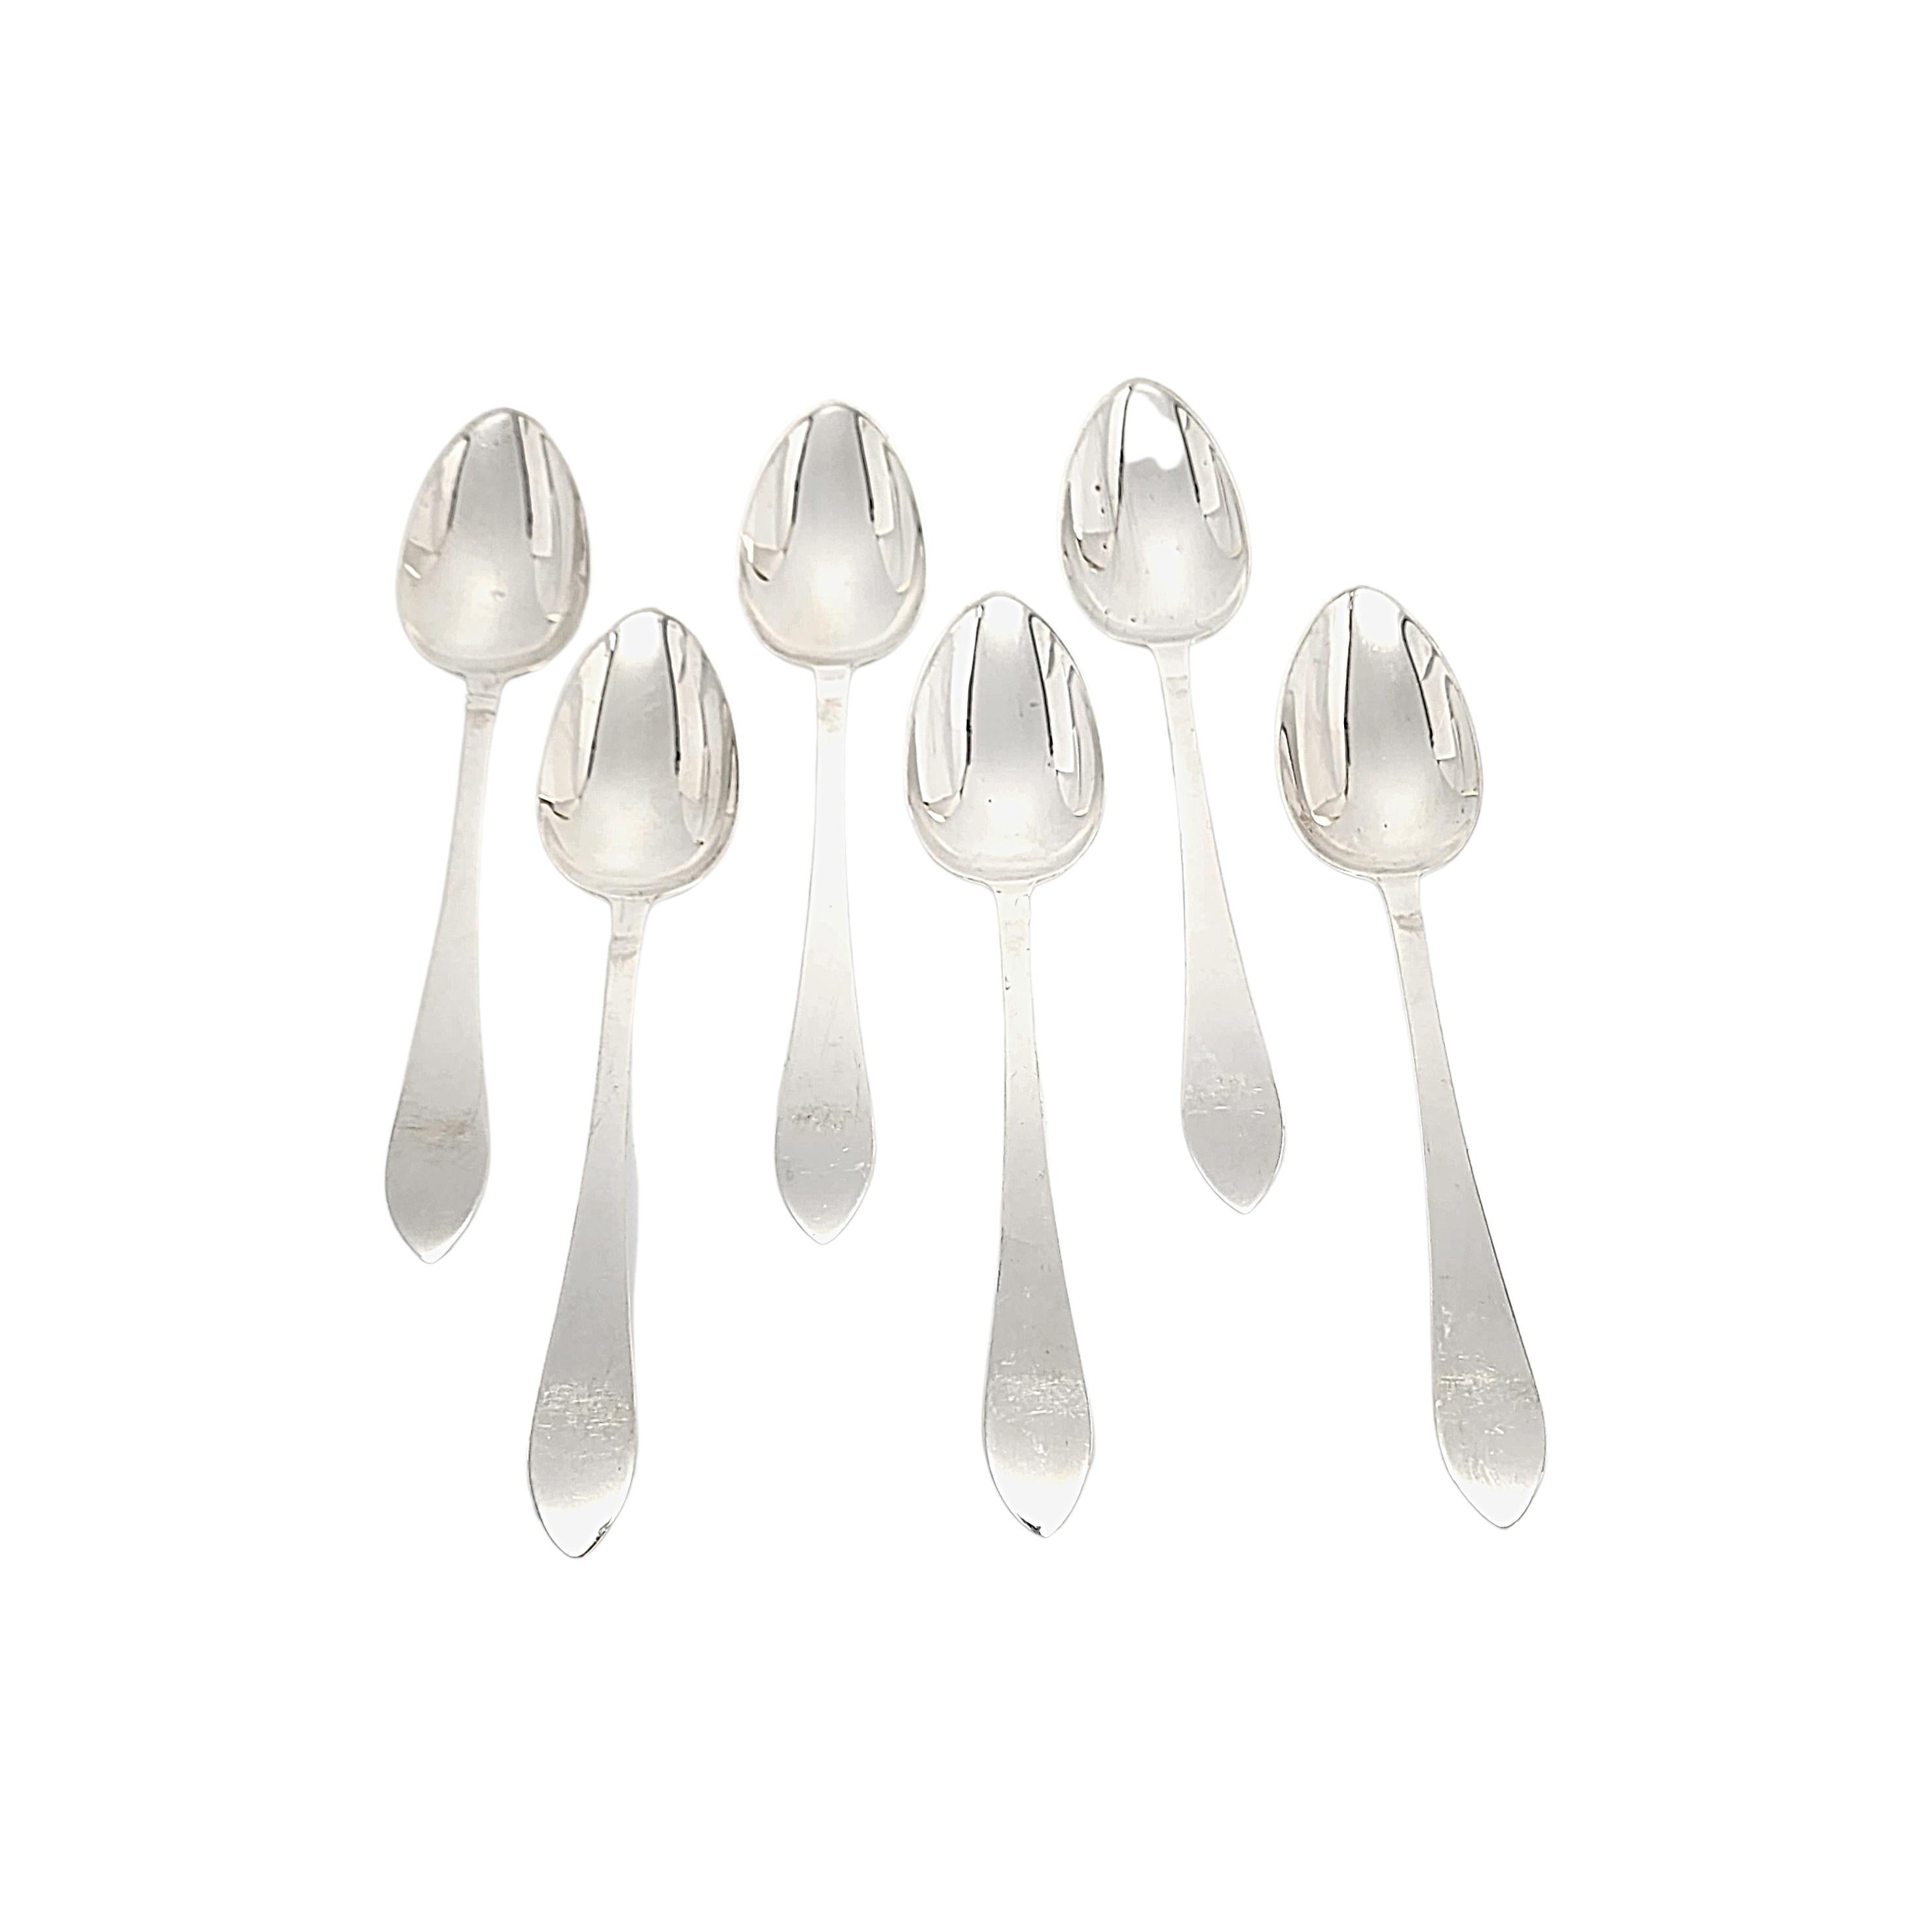 Set of 6 Tiffany & Co sterling silver fruit/orange spoons in the Faneuil pattern.

No monogram or engraving.

The Faneuil pattern was in production from 1910-1955 and was named for Faneuil Hall in Boston, MA. The pattern's simple and elegant design